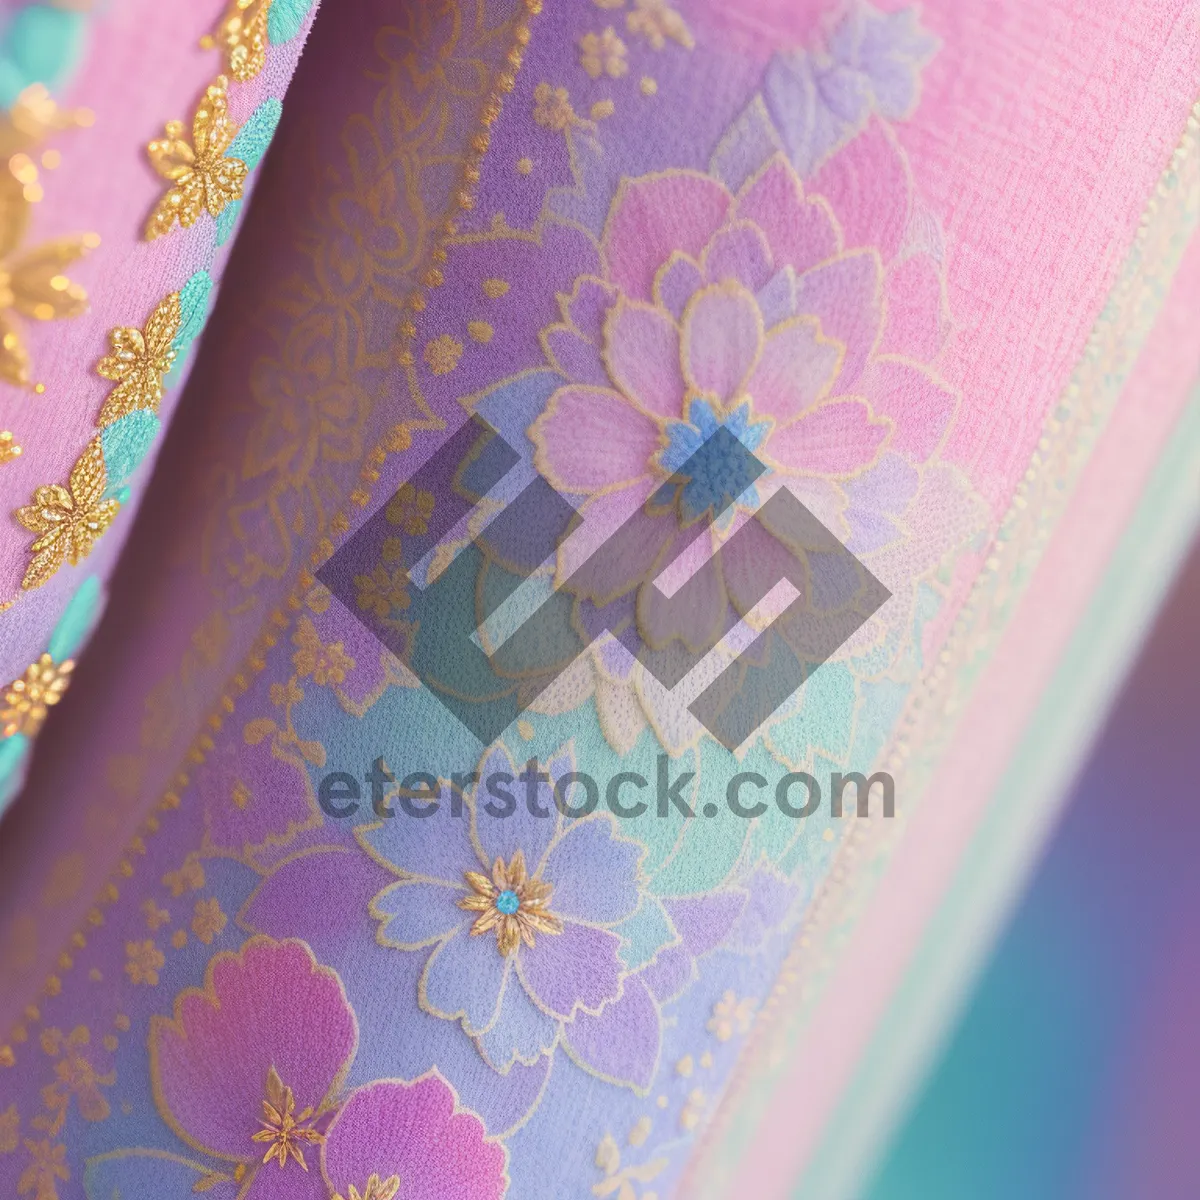 Picture of Cotton Handkerchief Box with Decorative Pattern